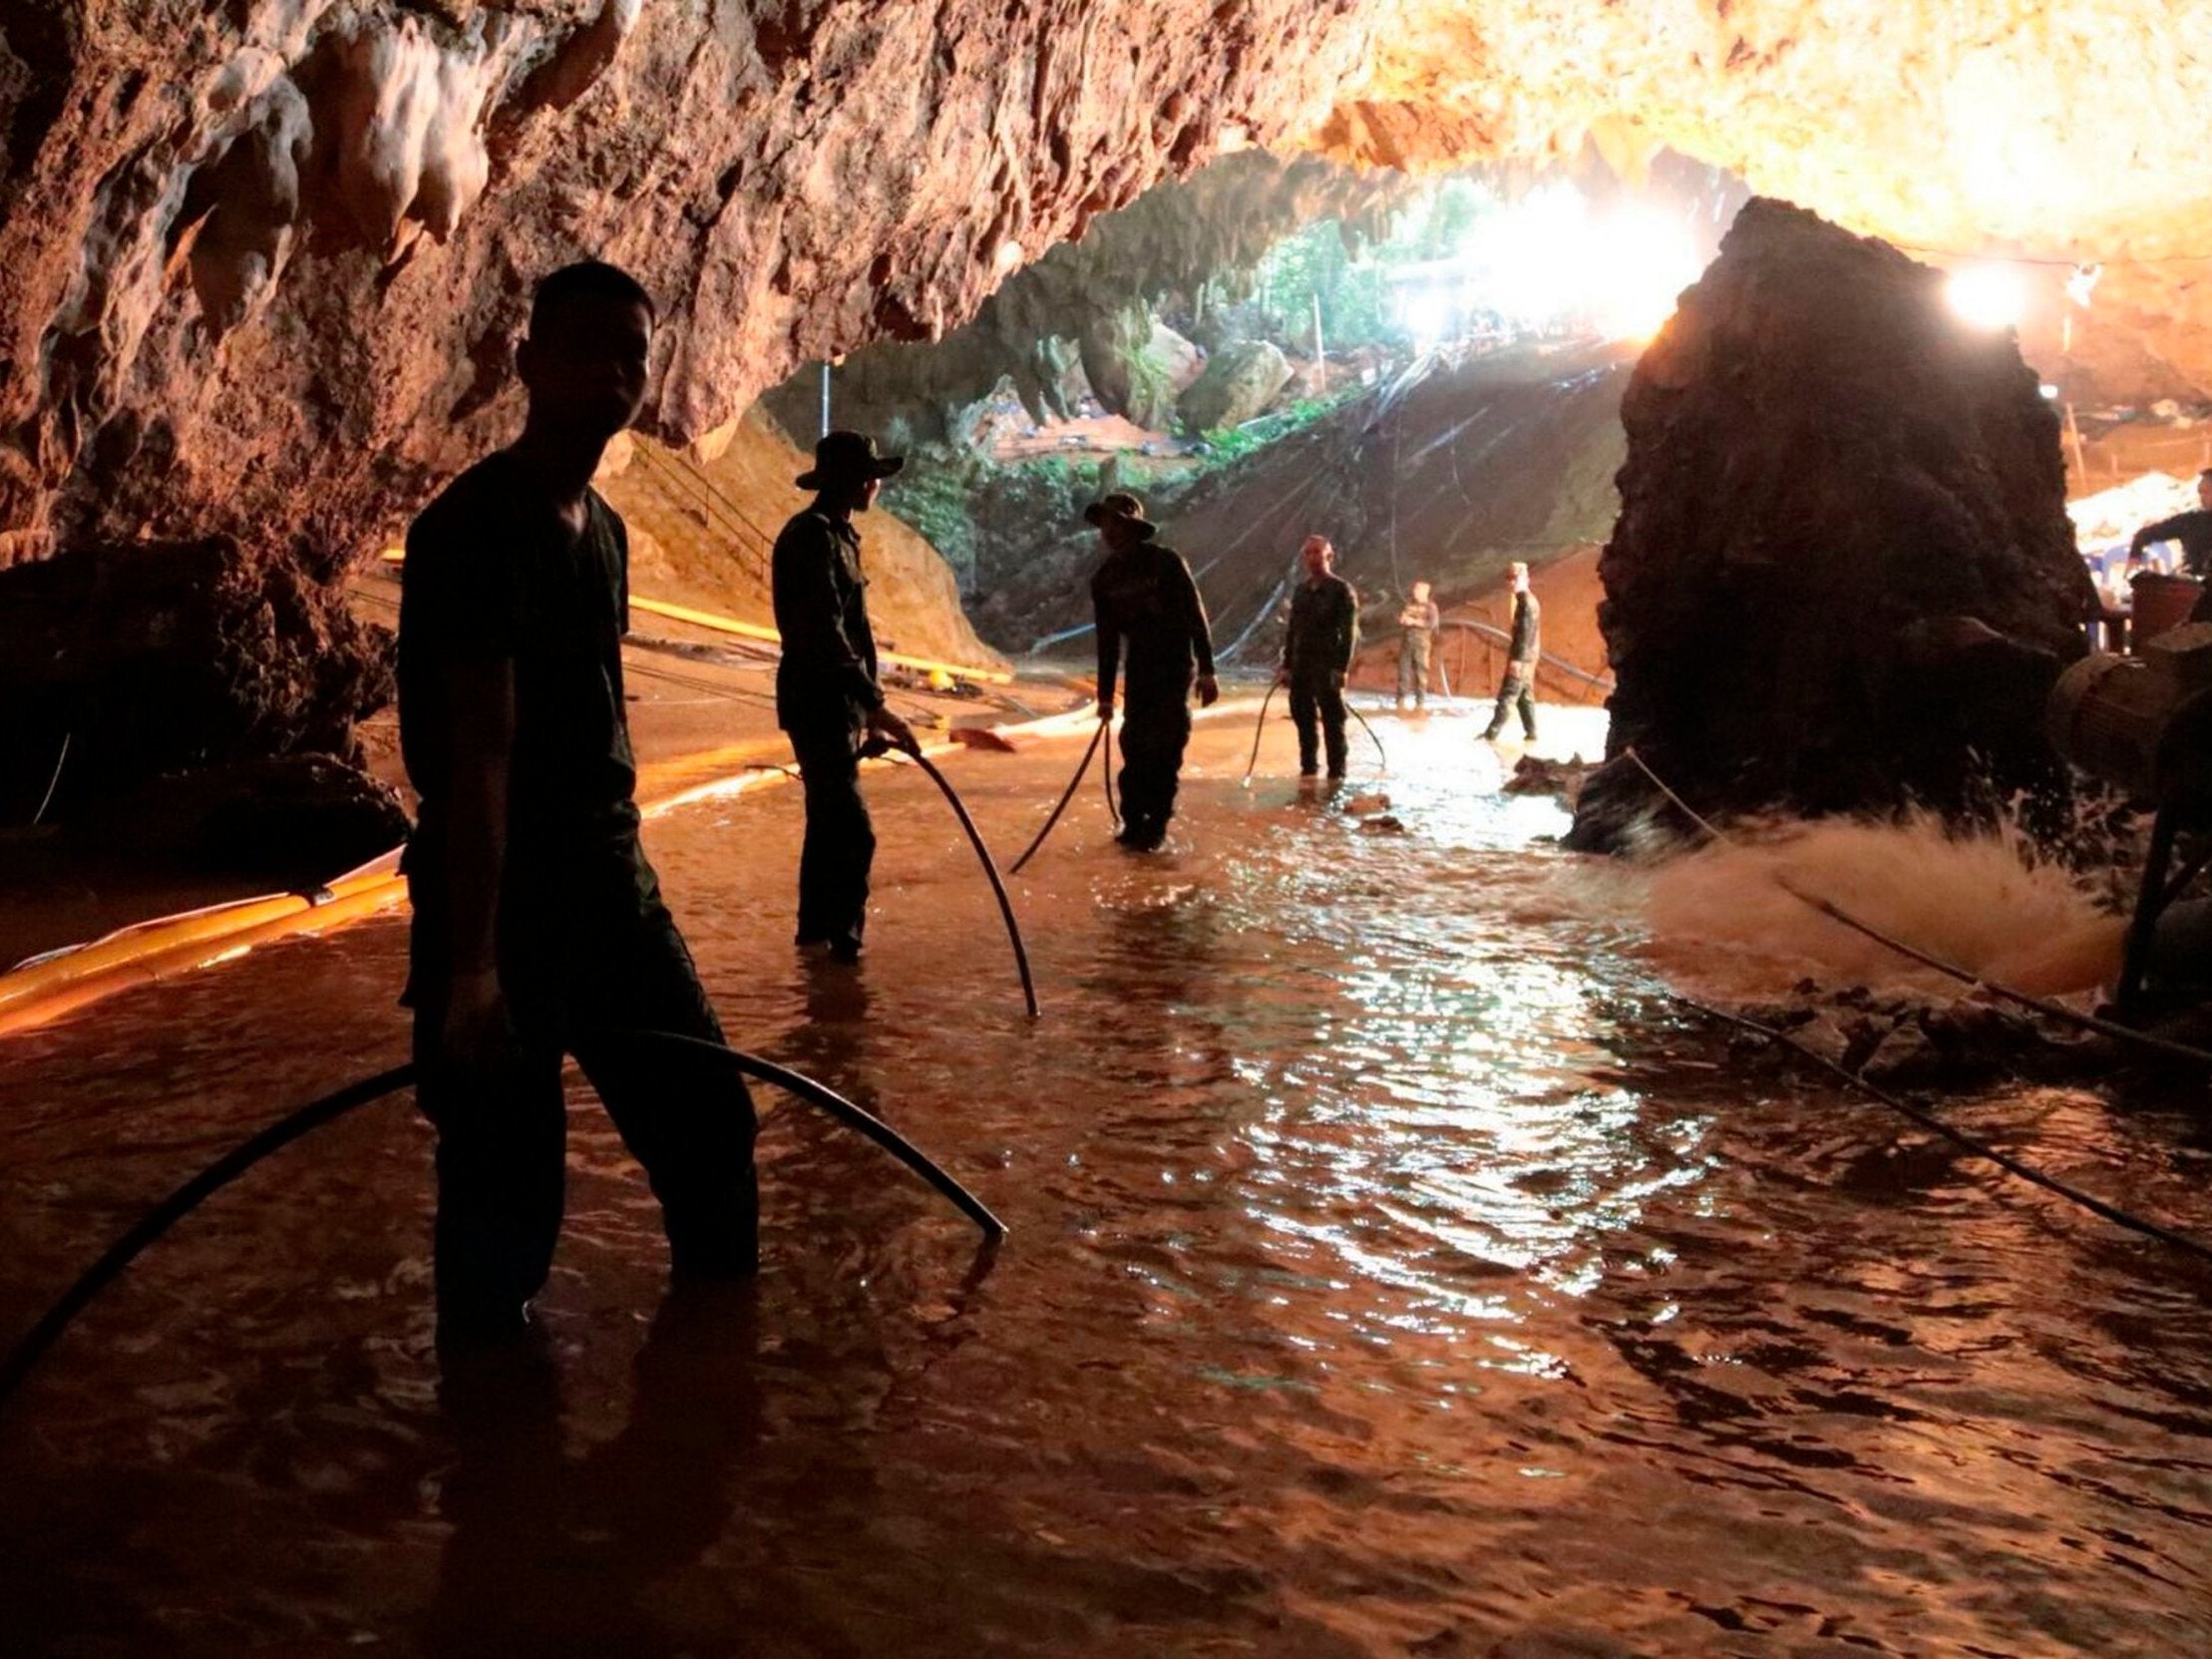 Thailand cave rescue: Heavy rain may trigger early evacuation of trapped boys, as parents respond to notes